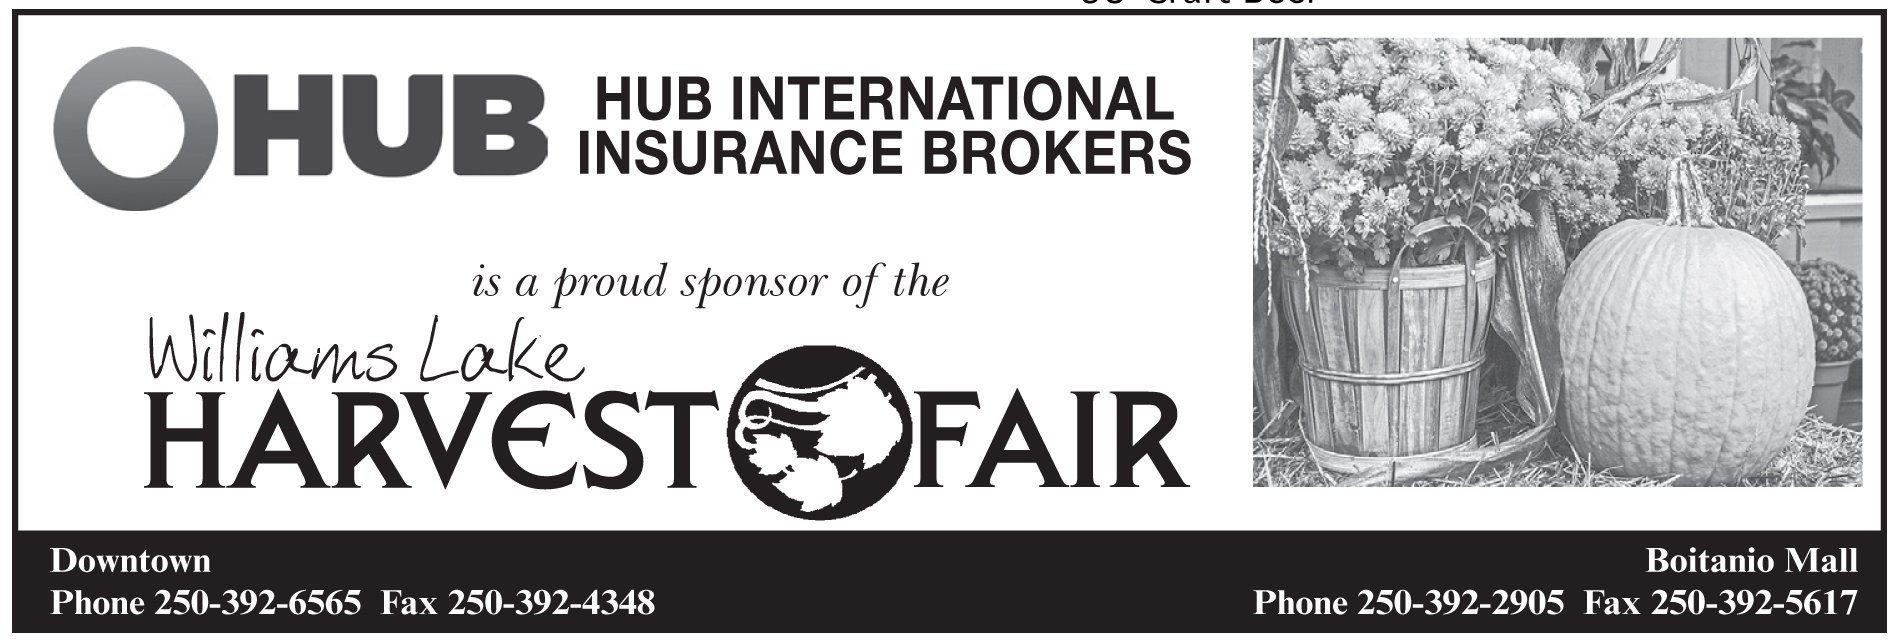 Please take a moment to visit one of our wonderful sponsor's, HUB International Insurance Brokers, Williams Lake